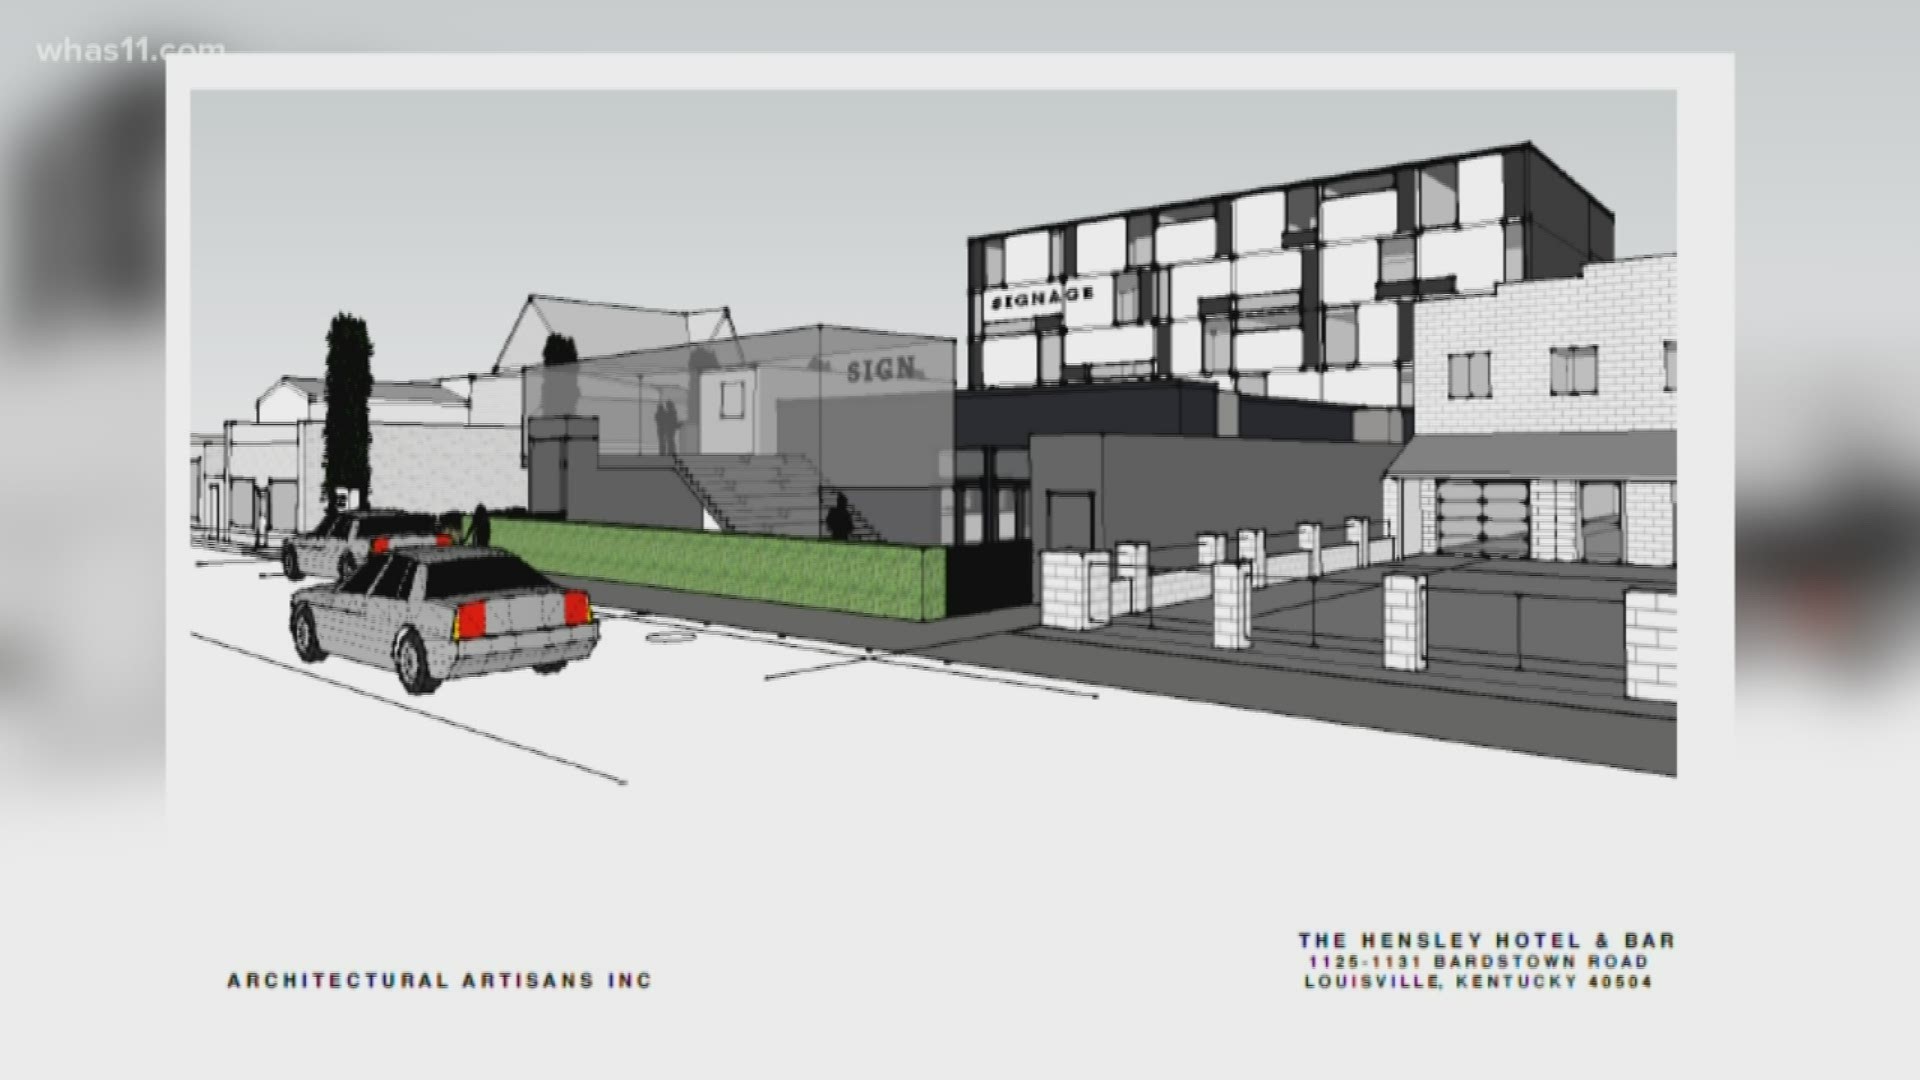 Plans for the new building were submitted to the city just this month by Utopia Ventures. It'll be the first time the company has worked on project like this.